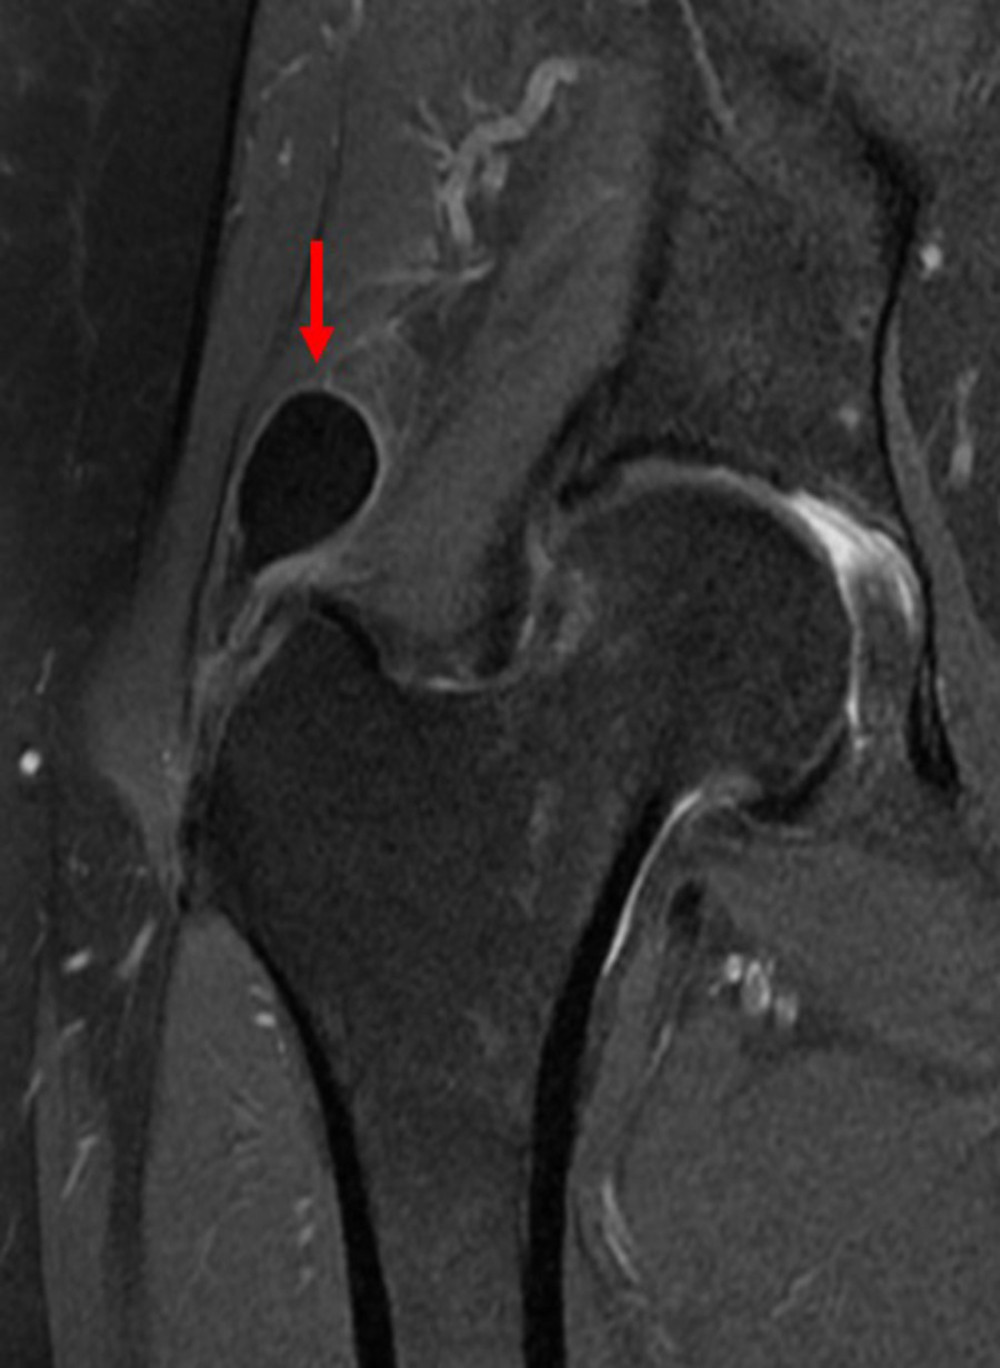 Proton density-weighted coronal image of right hip calcification (red arrow).